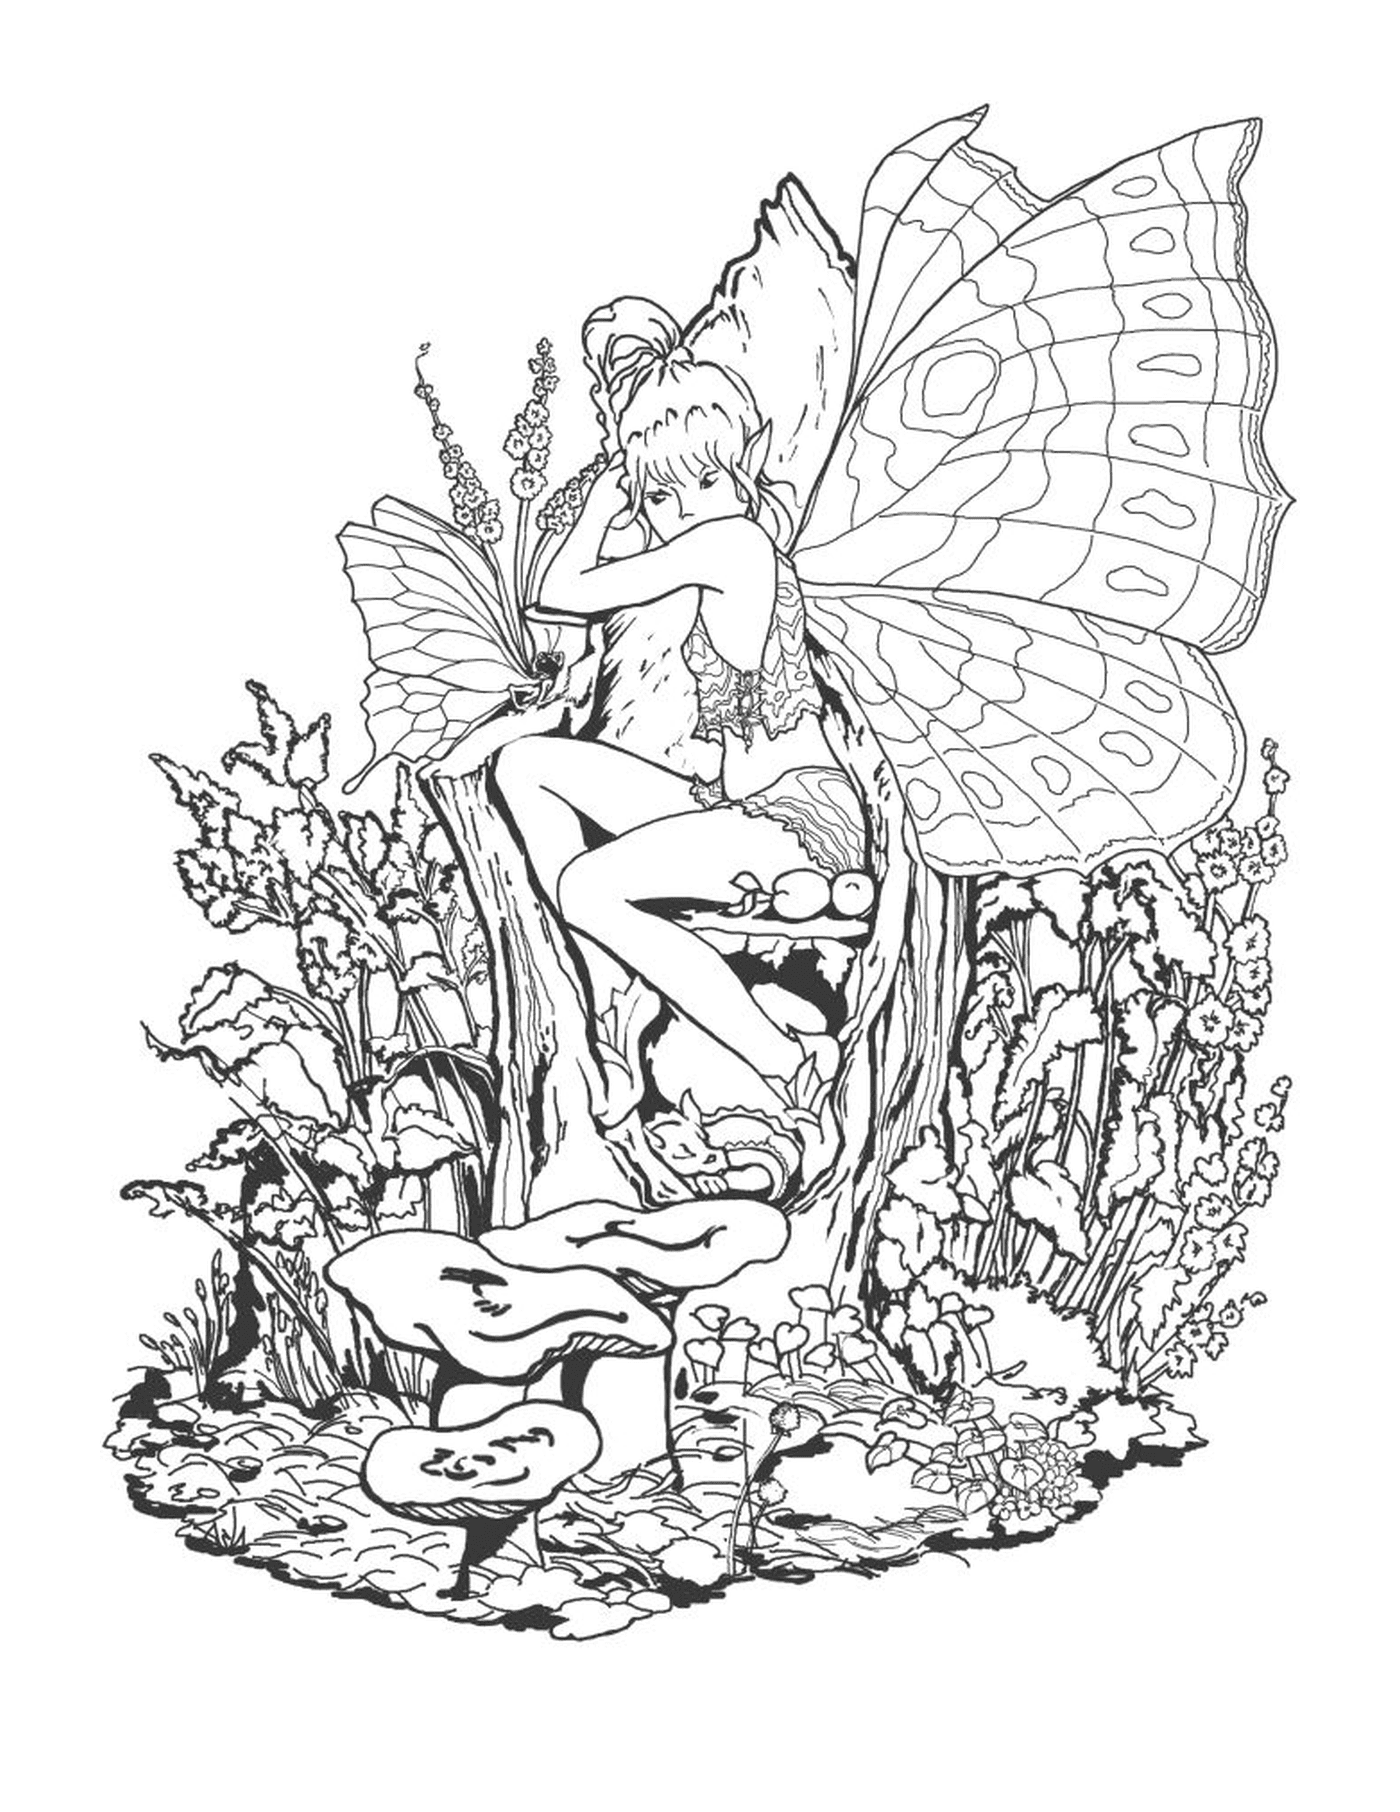  A fairy sitting on a mushroom with a butterfly in her hand 